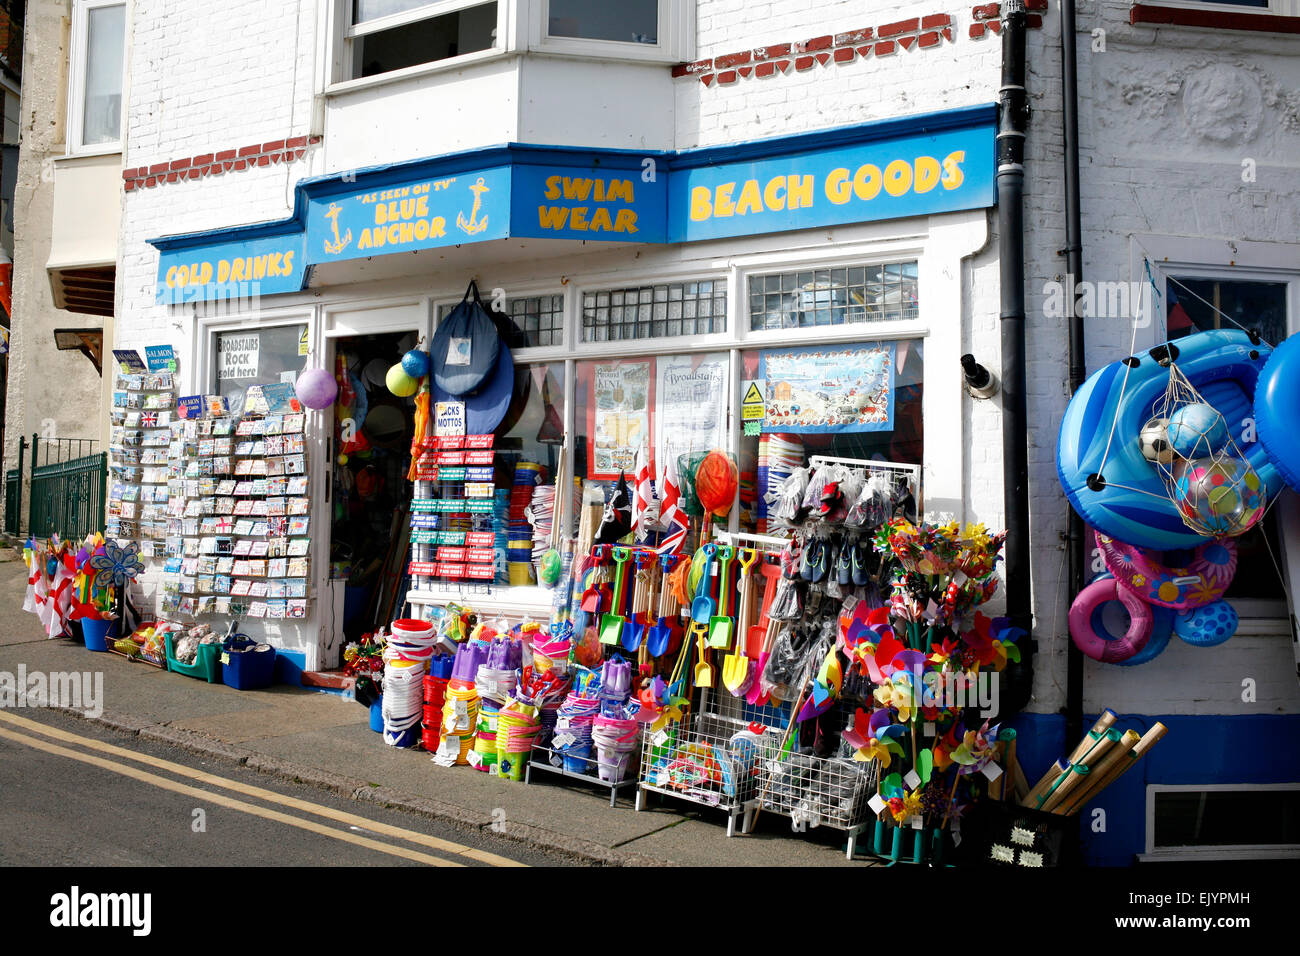 beach goods shop in broadstairs town east kent coast uk april 2015 Stock Photo